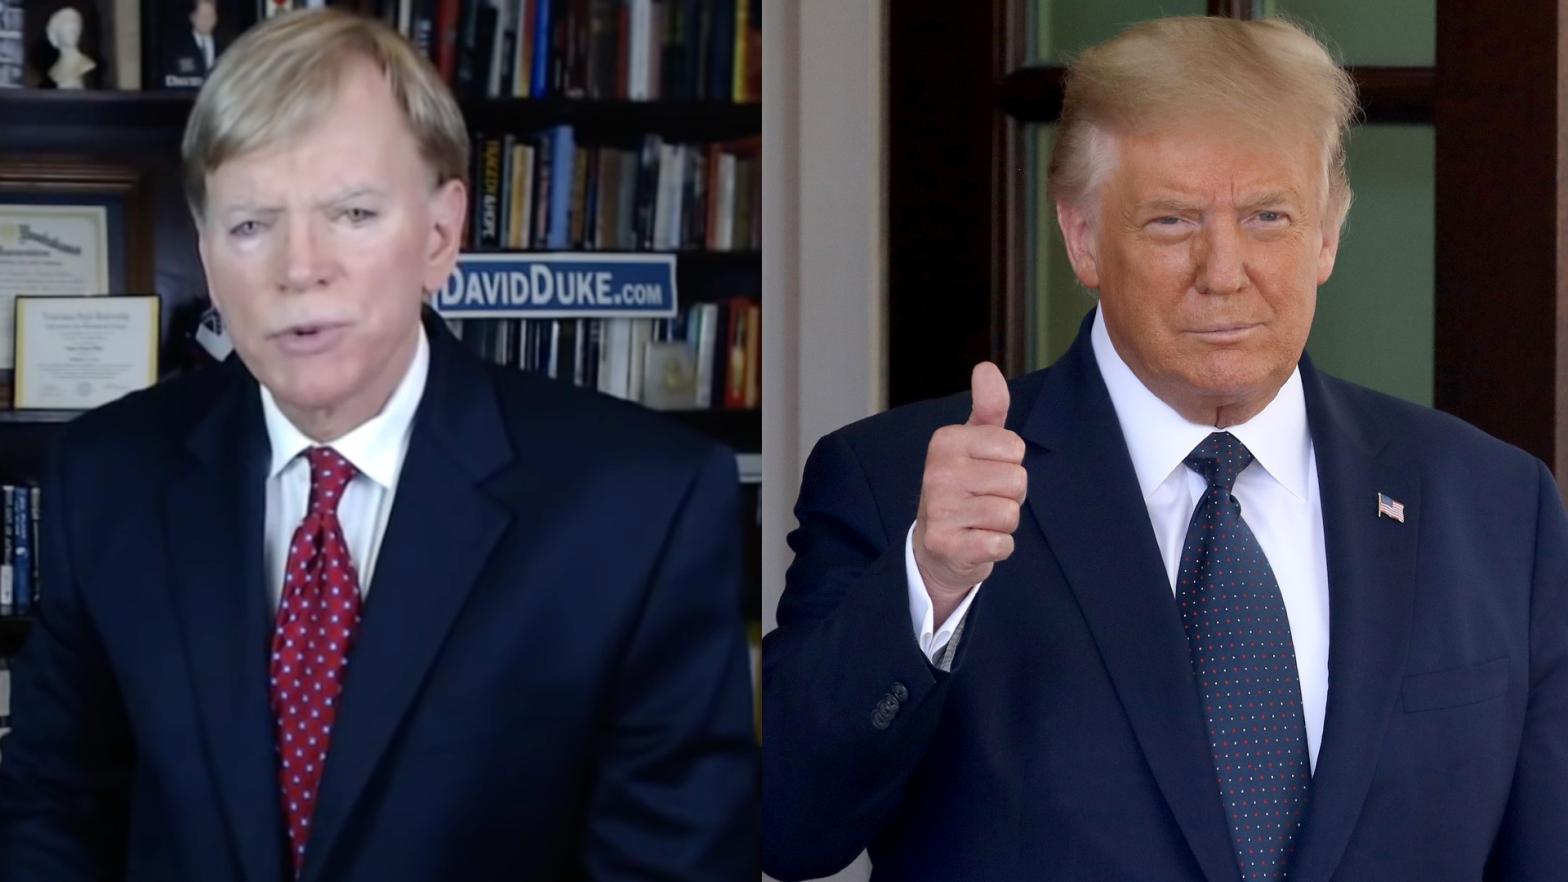 Famous white supremacist David Duke (left) and even more famous white supremacist Donald Trump (right) (Image: Newsy YouTube screenshot/Getty Images, Getty Images)